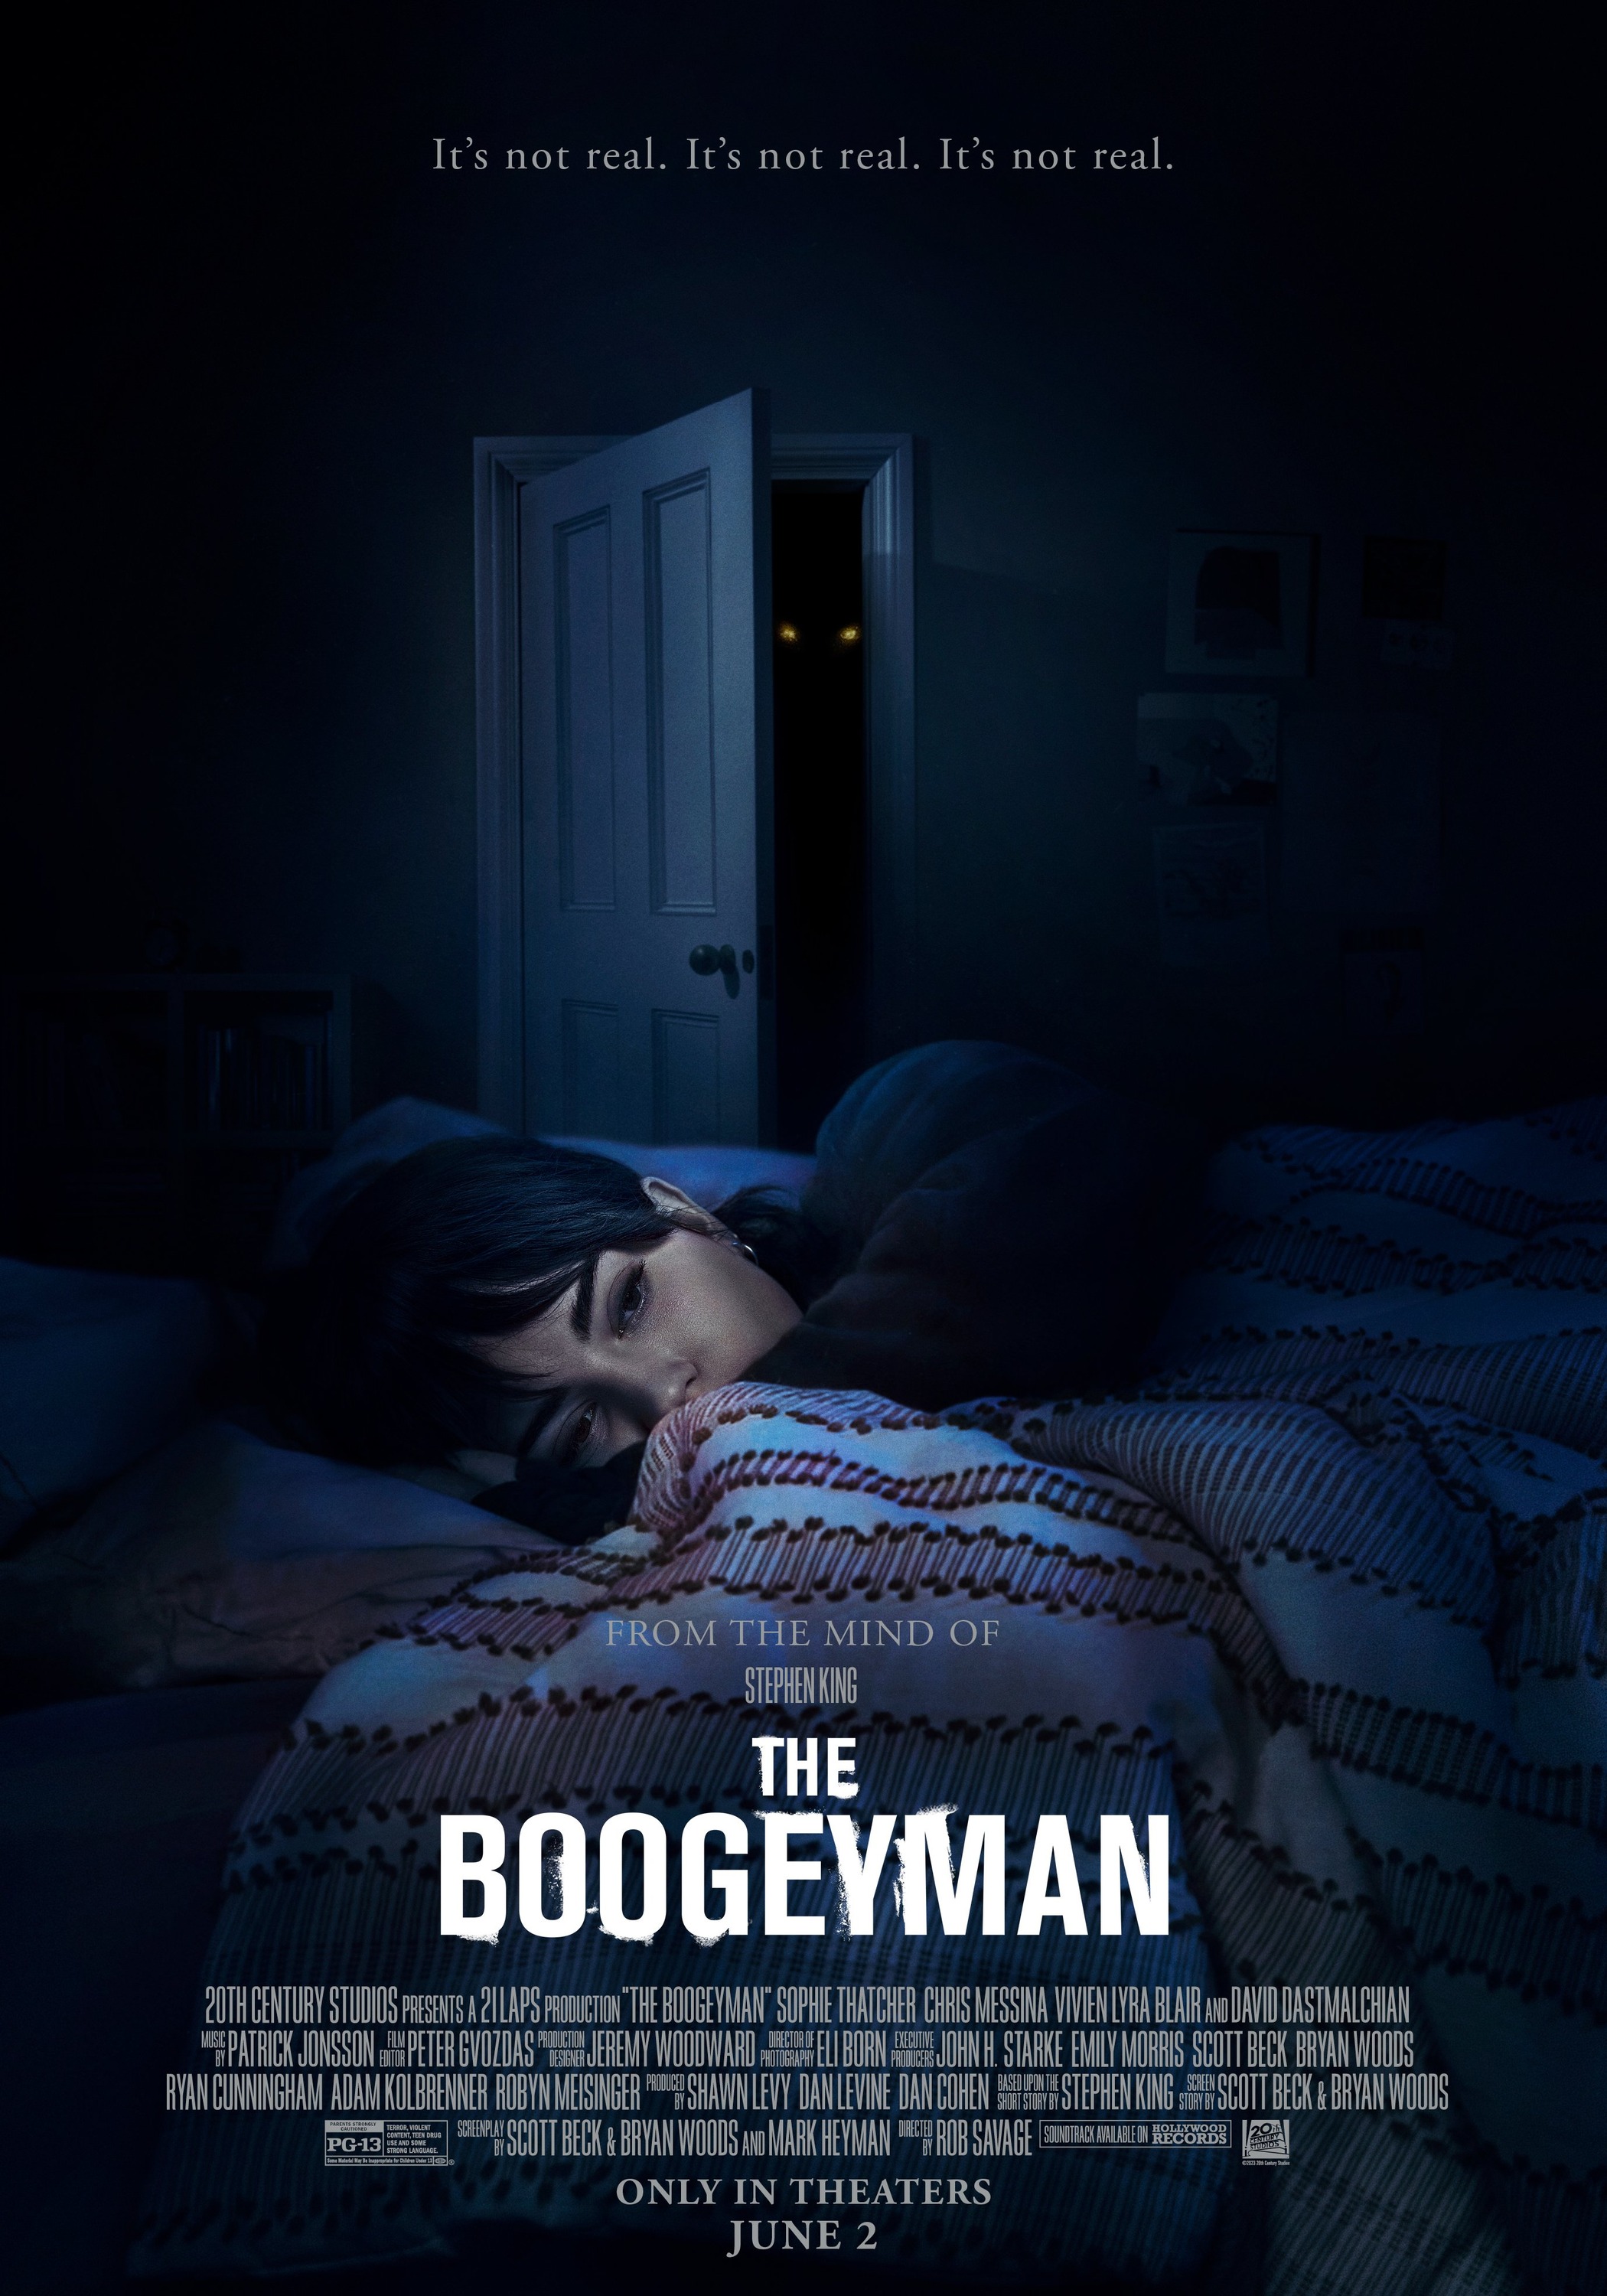 dani manzanares recommends the boogeyman full movie pic